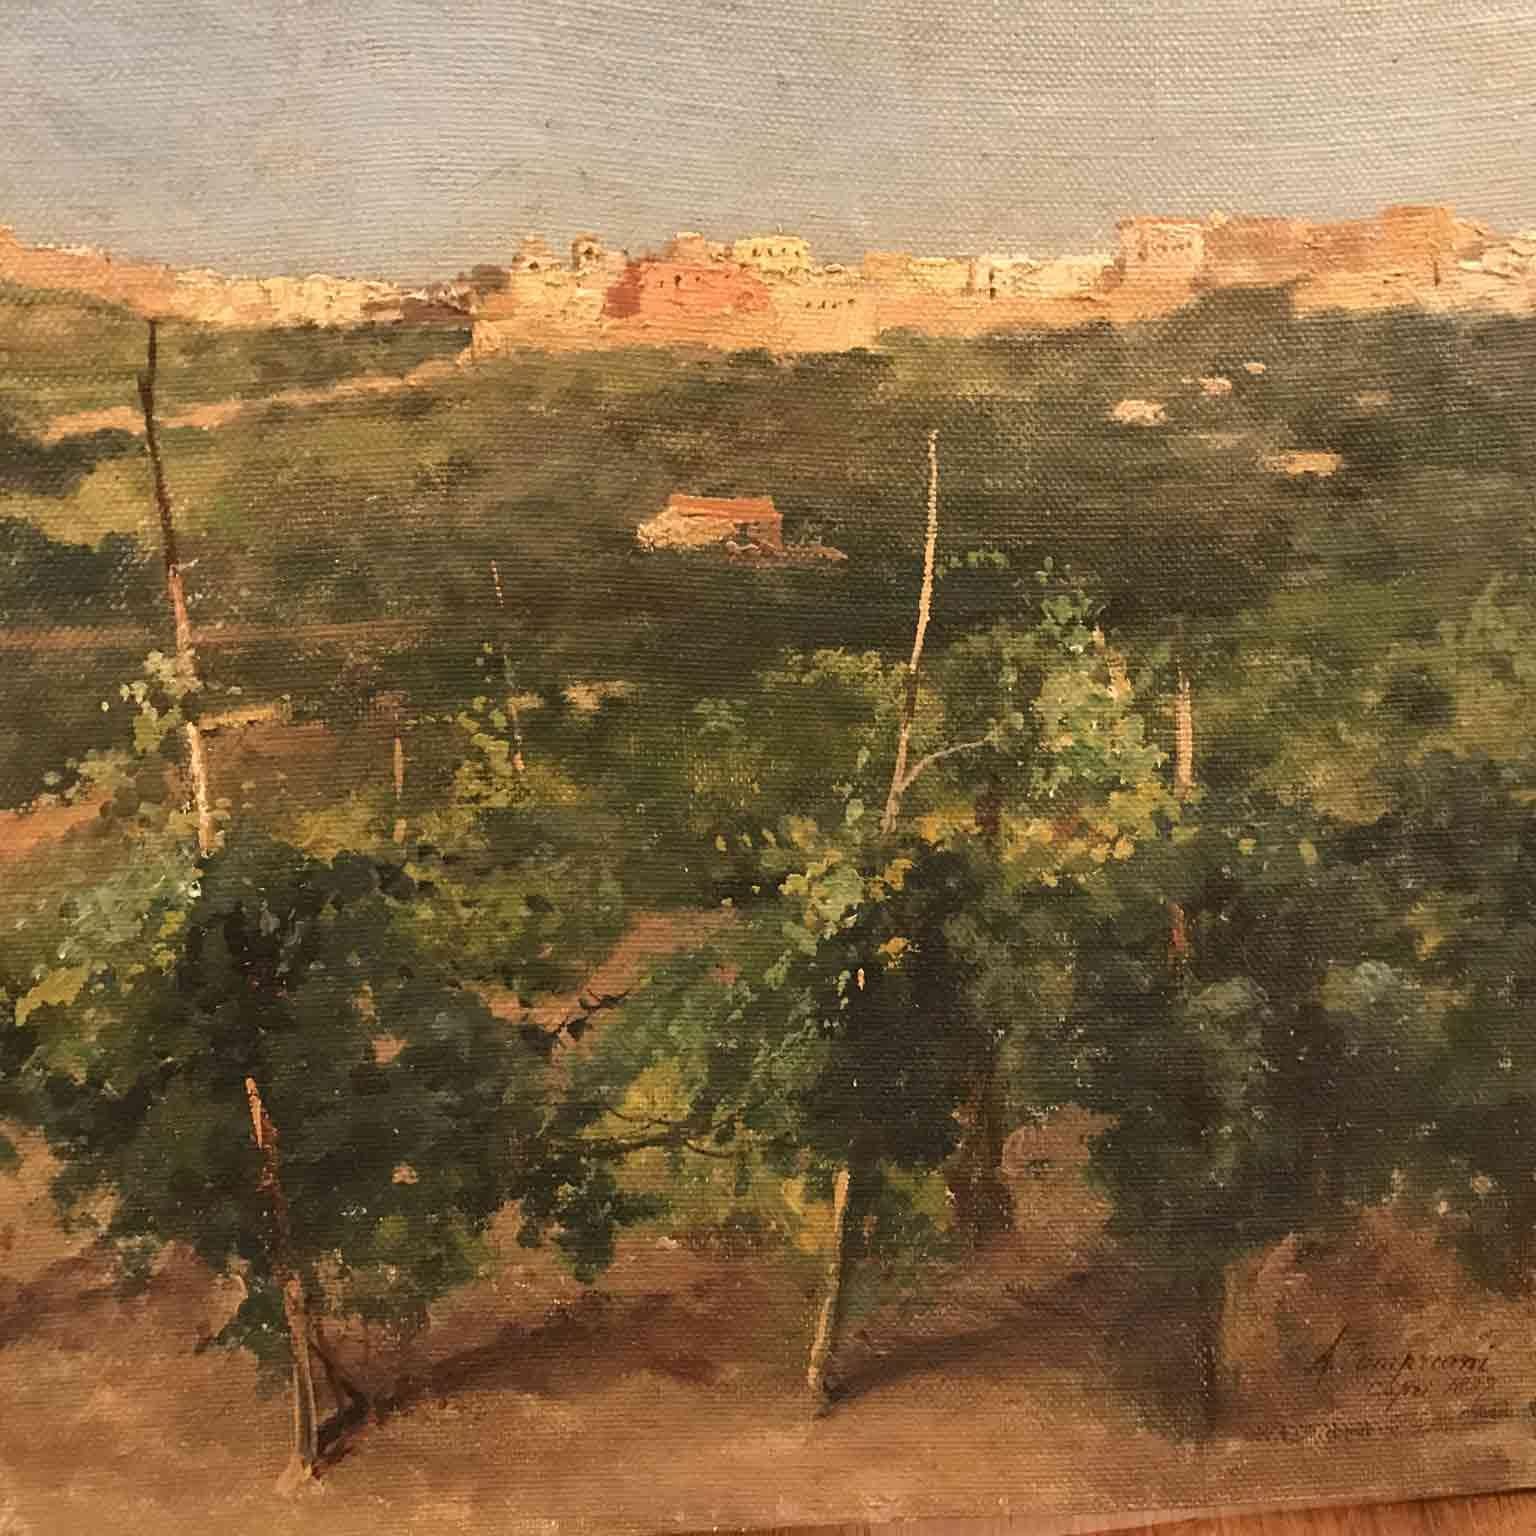 Hand-Painted Capri Italy 19th Century Italian Countryside Landscape by Alceste Campriani